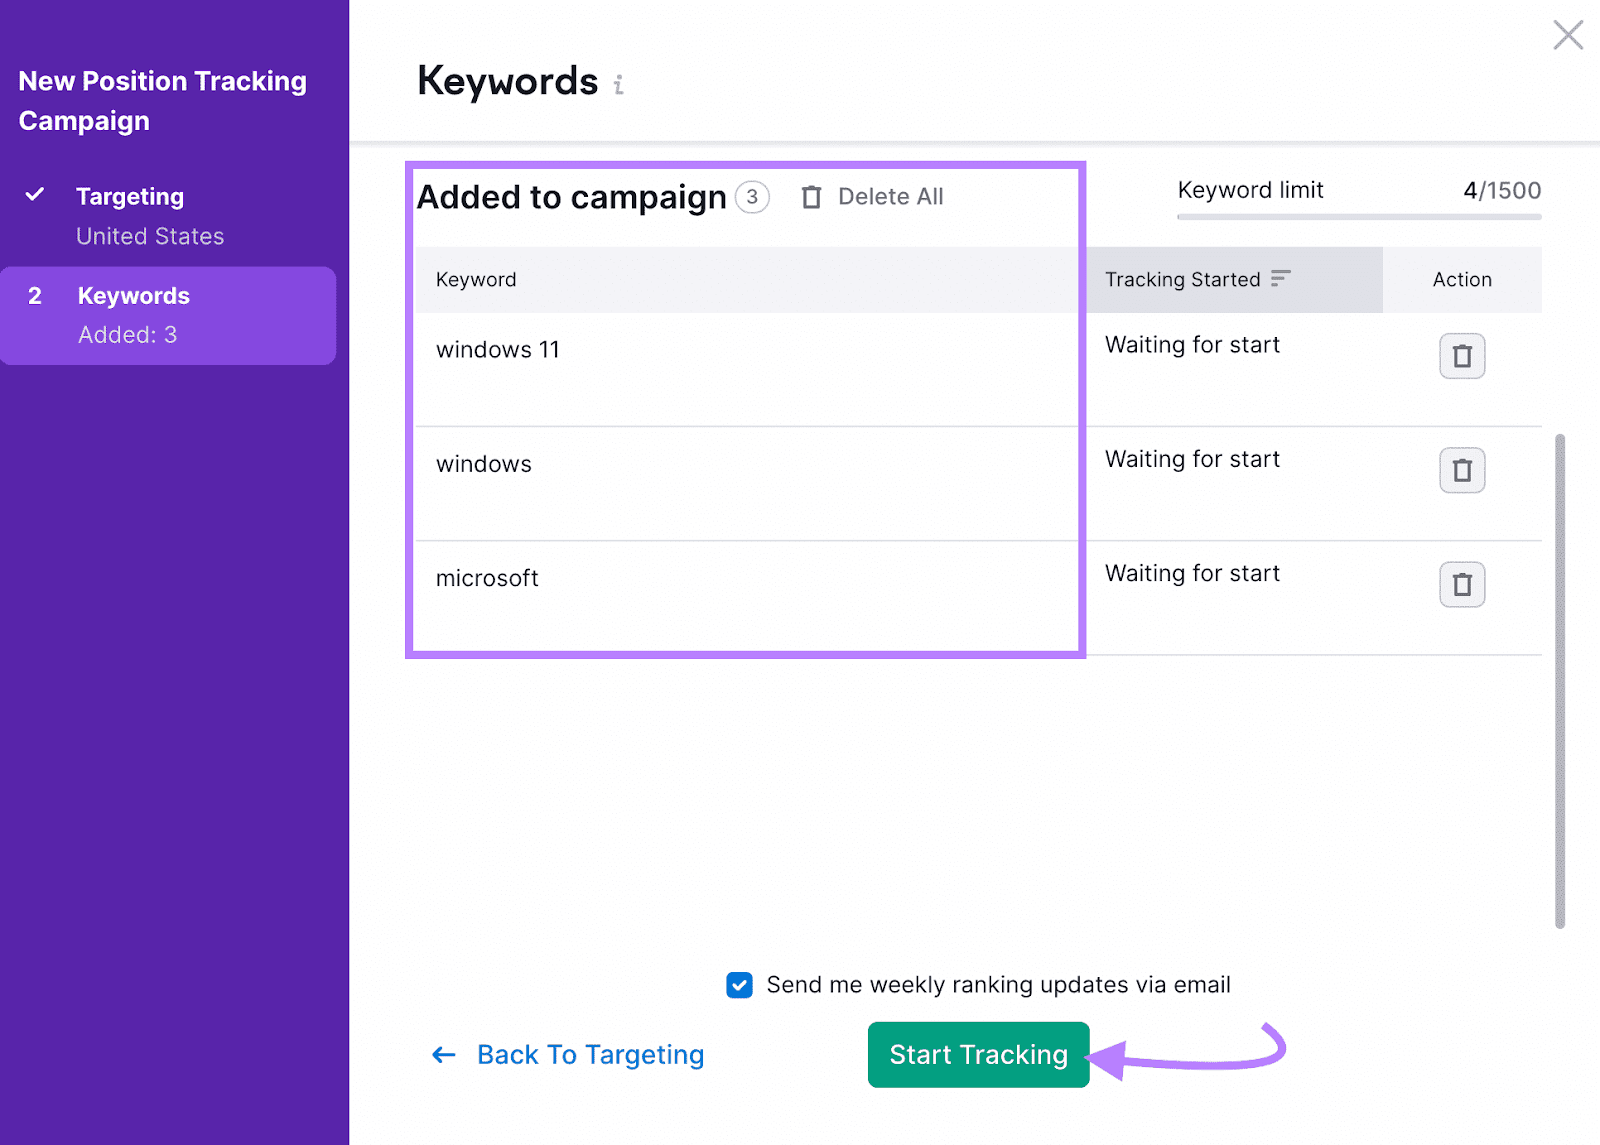 “Start Tracking" button selected under "Keywords" settings window